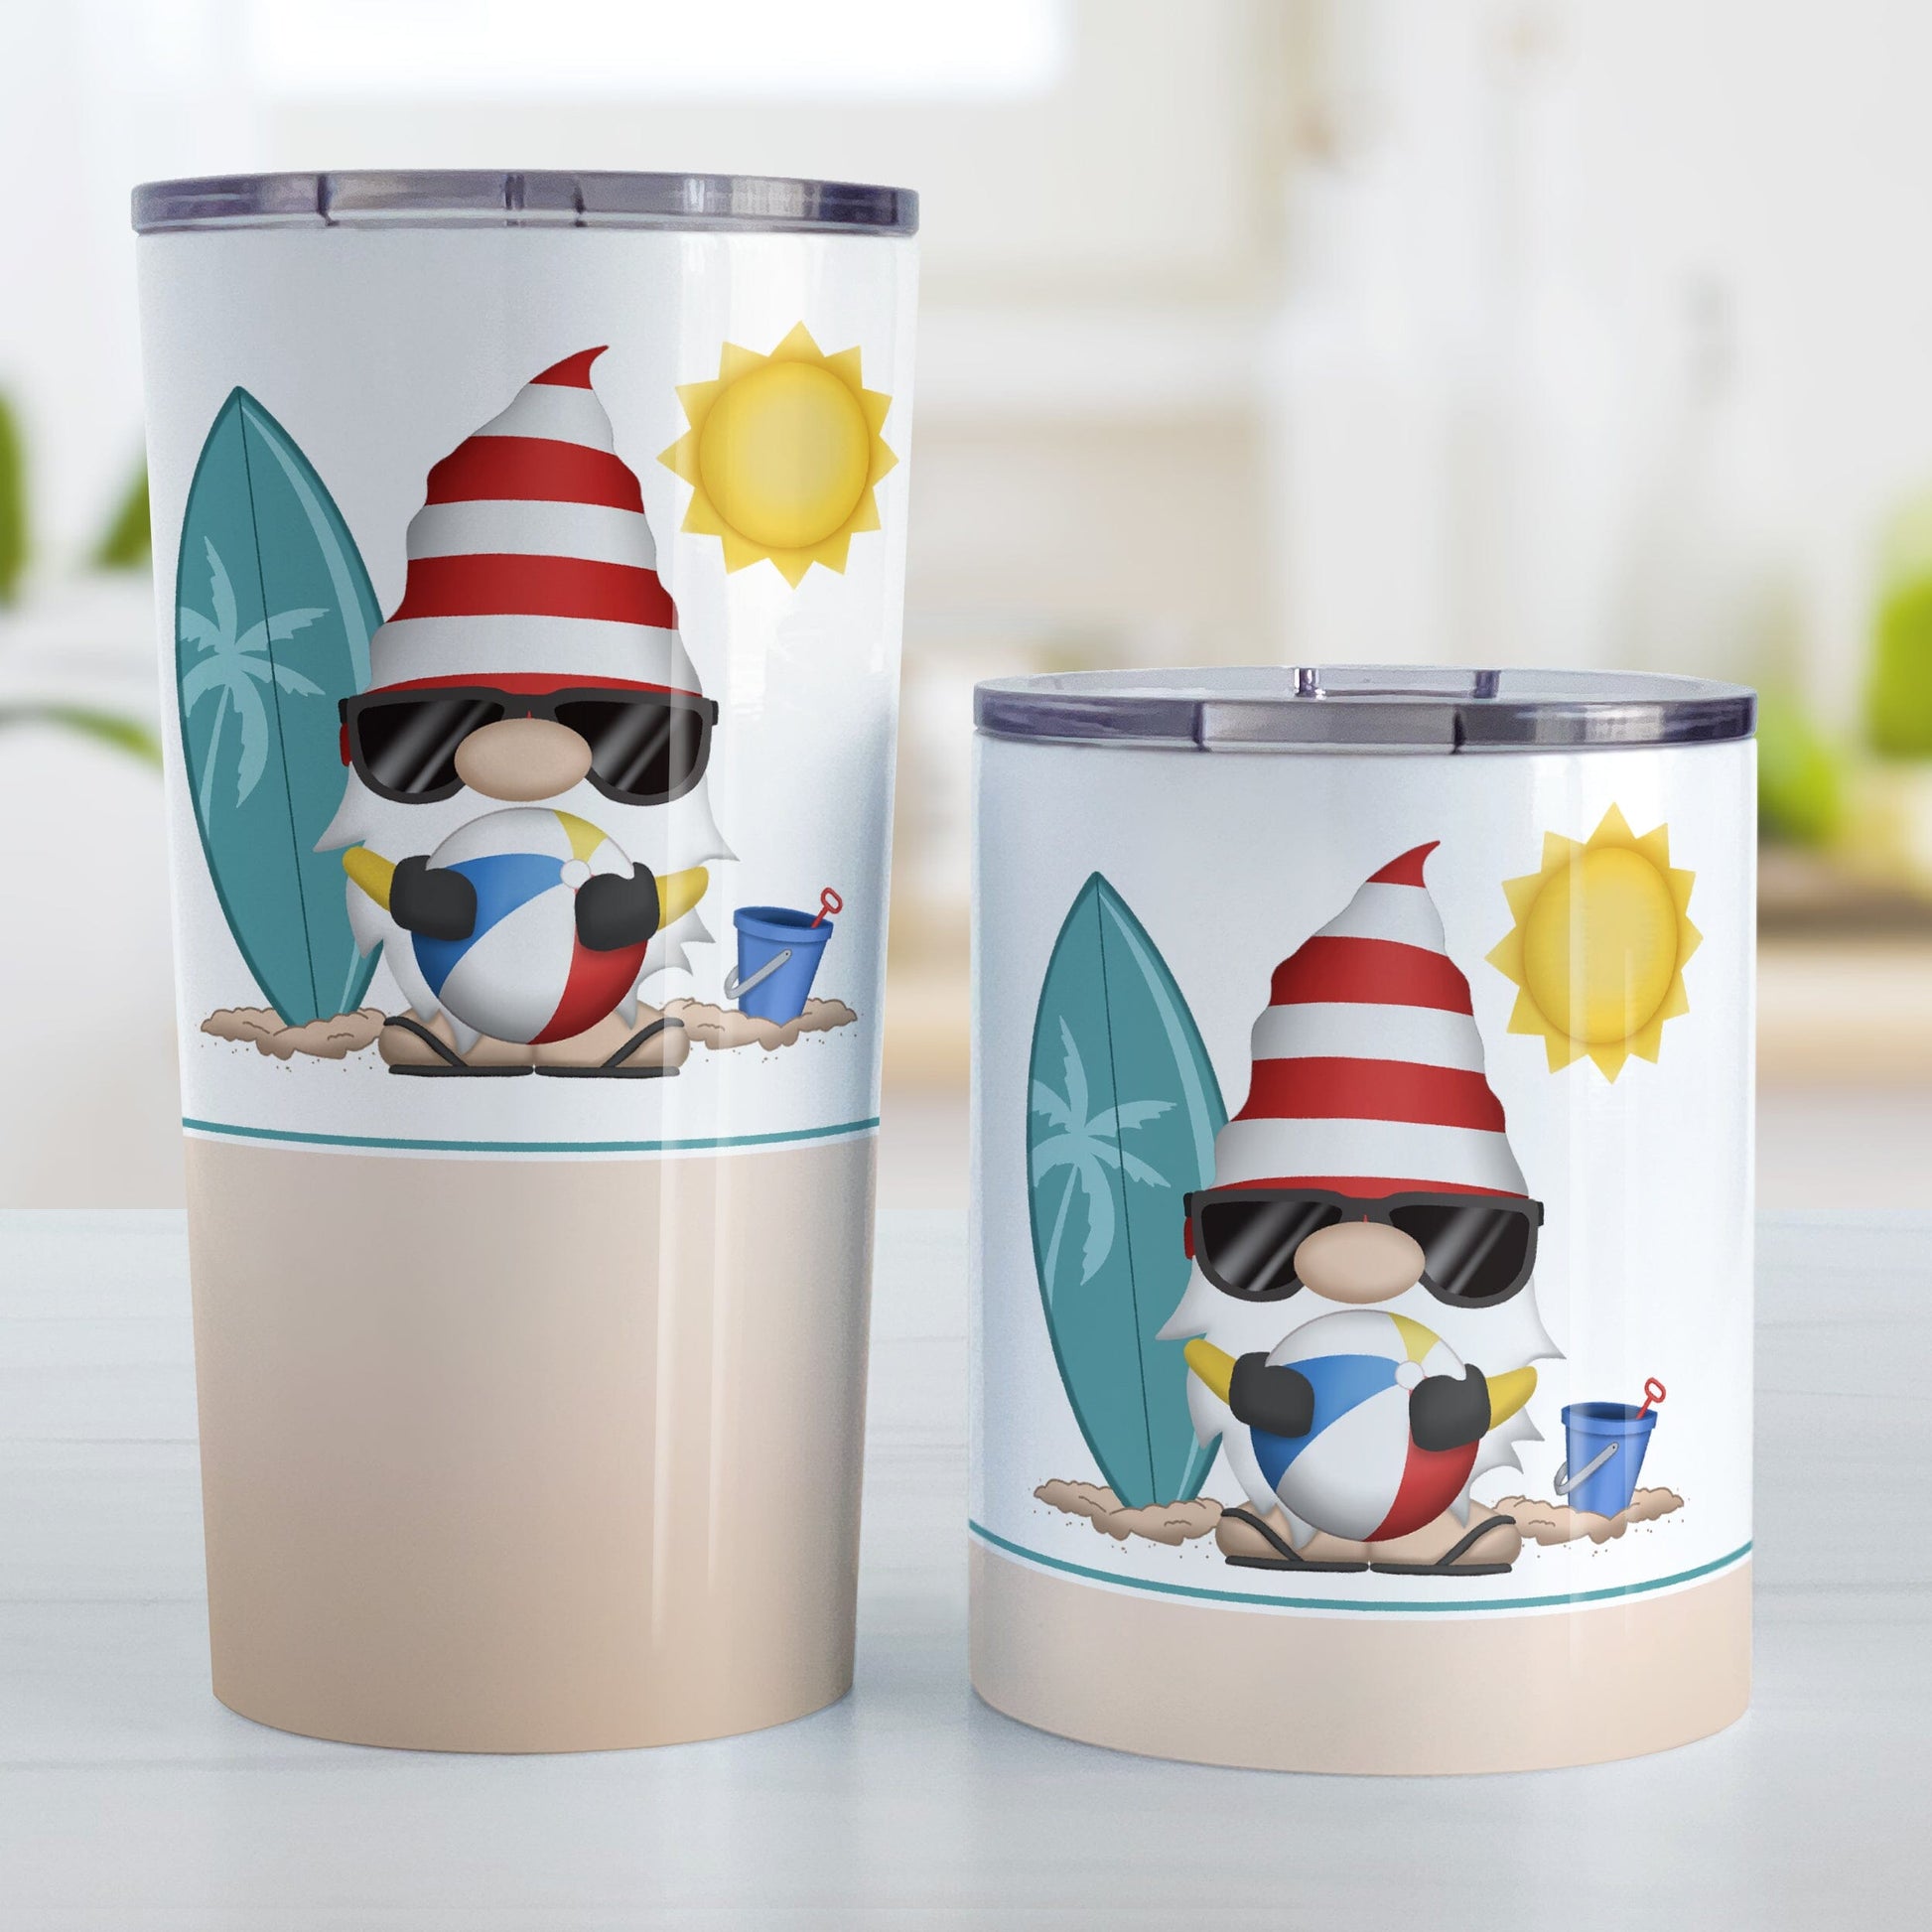 Summer Beach Gnome Tumbler Cups (20oz or 10oz) at Amy's Coffee Mugs. Stainless steel tumbler cups designed with an adorable gnome in sunglasses, holding a beach ball, with a surfboard and bucket in the sand on either side of him, and a bright yellow sun in the sky. Below the gnome is a sandy beige background color along the bottom of the cups. Photo shows both sized cups on a table next to each other.